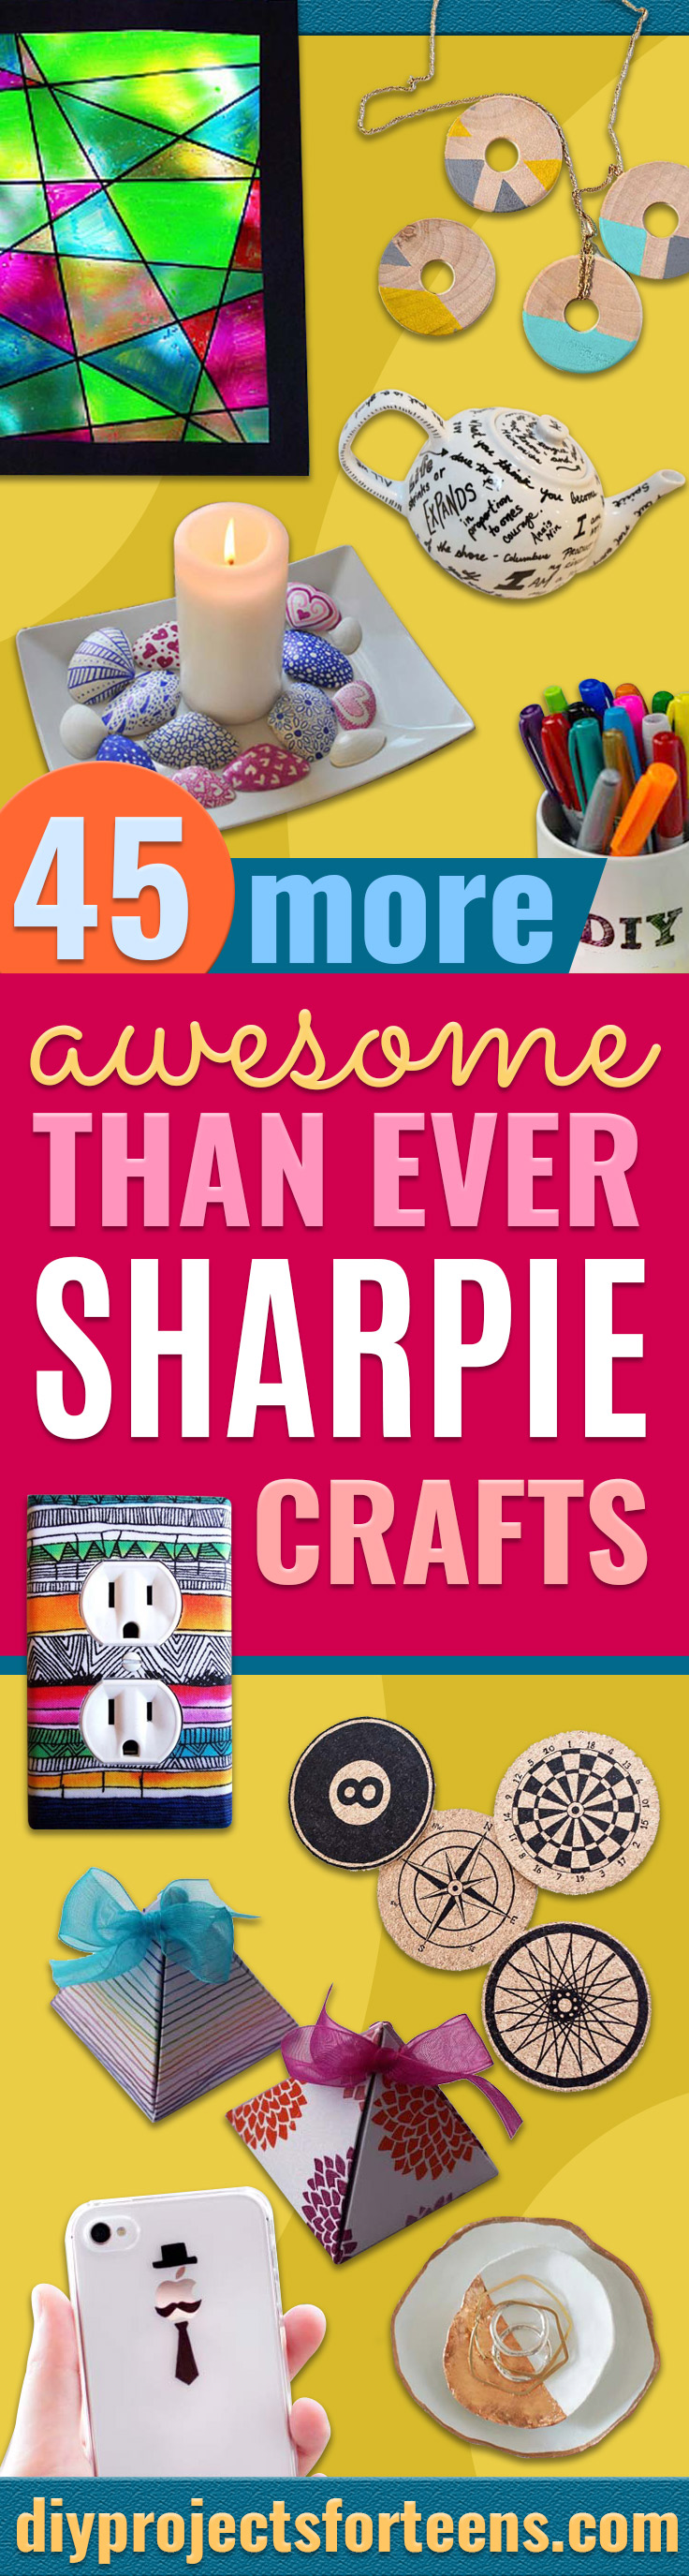 Sharpie Crafts For Teens, Kids and Adults - DIY Projects and Ideas with Sharpies Using Markers on Fabric, Glass, Mugs, T- Shirts, Plates, Paper - Creative Arts and Crafts Ideas for Room Decor, Gifts and Fun Fashion , Teen Bedroom Wall Art